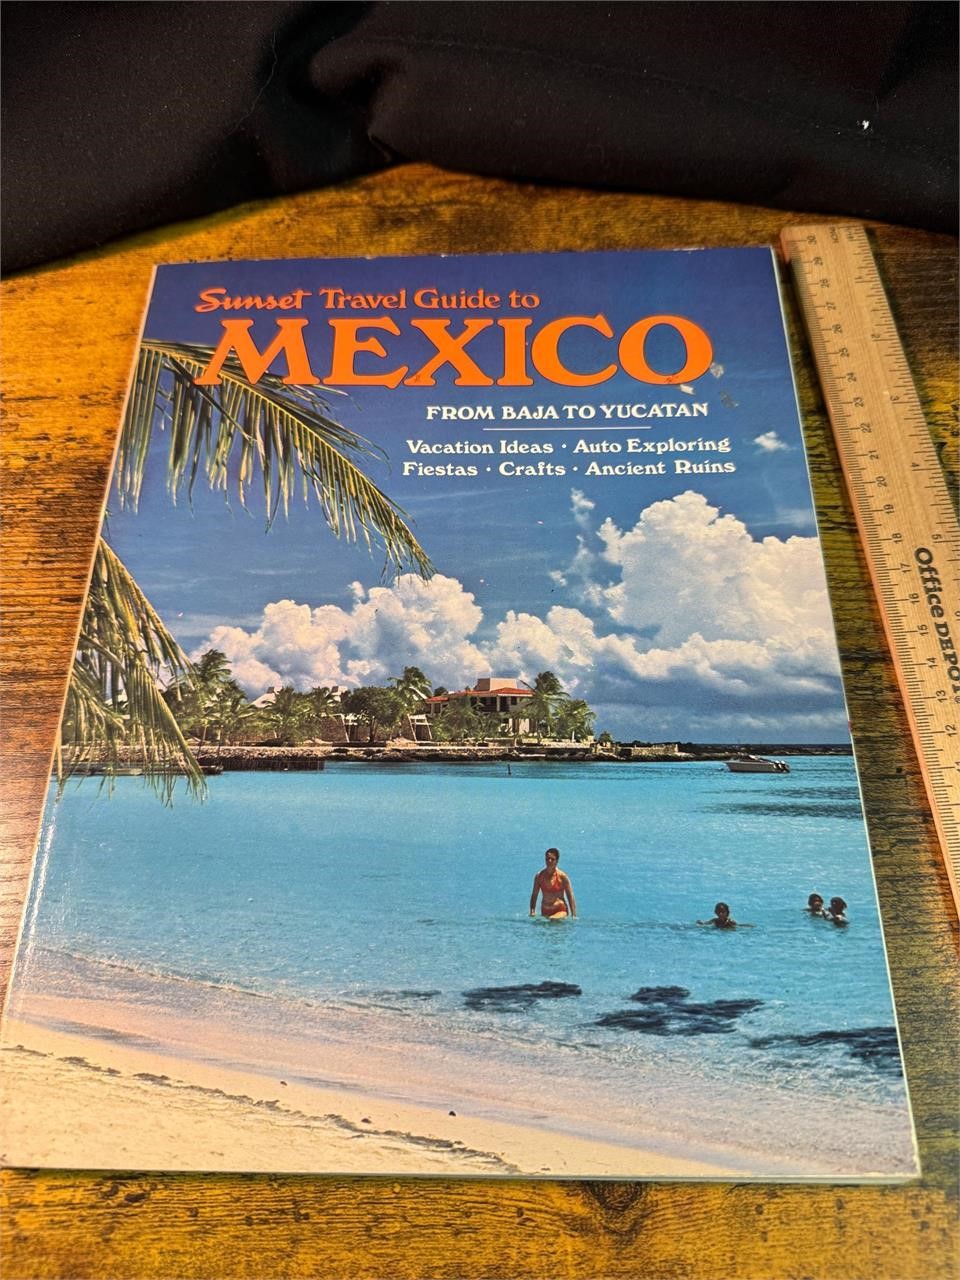 SUNSET "TRAVEL TO MEXICO" GUIDE